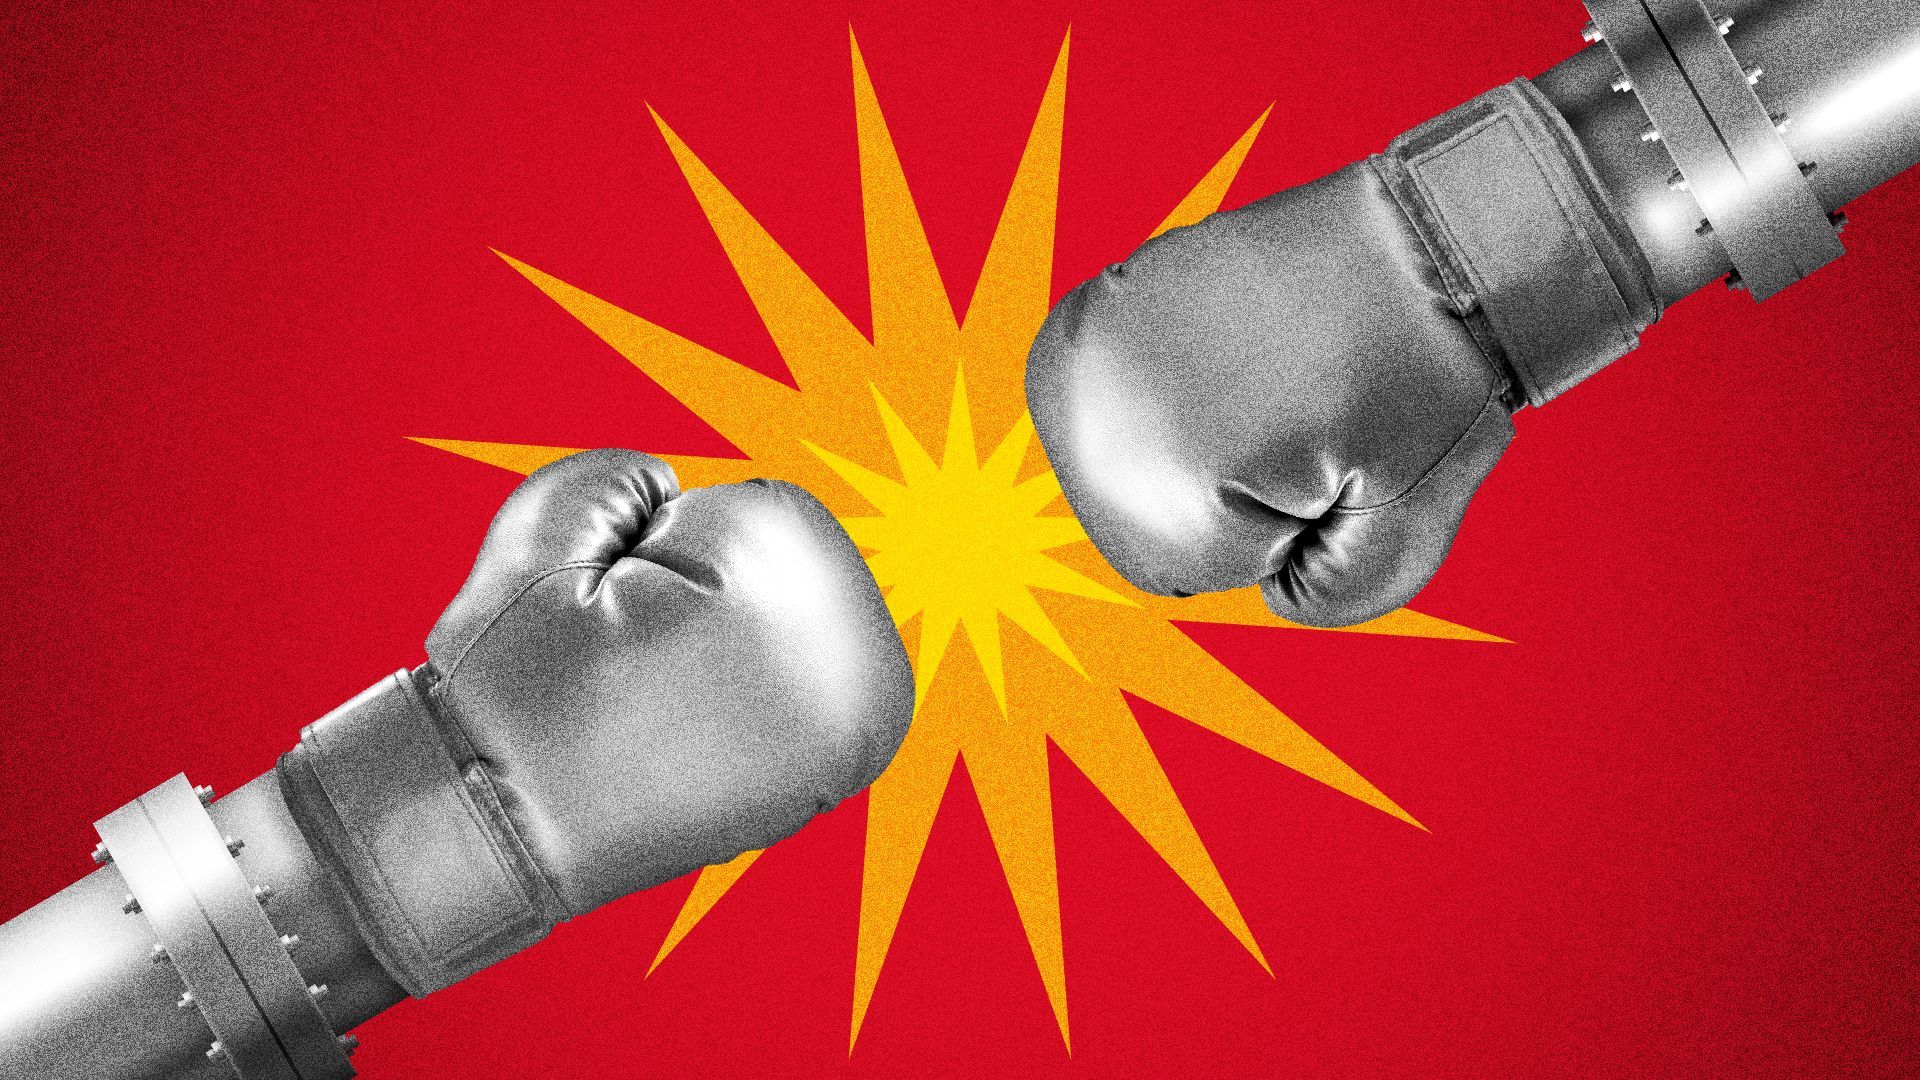 Illustration of two boxing gloves made of pipes facing off with a stylized explosion between them.